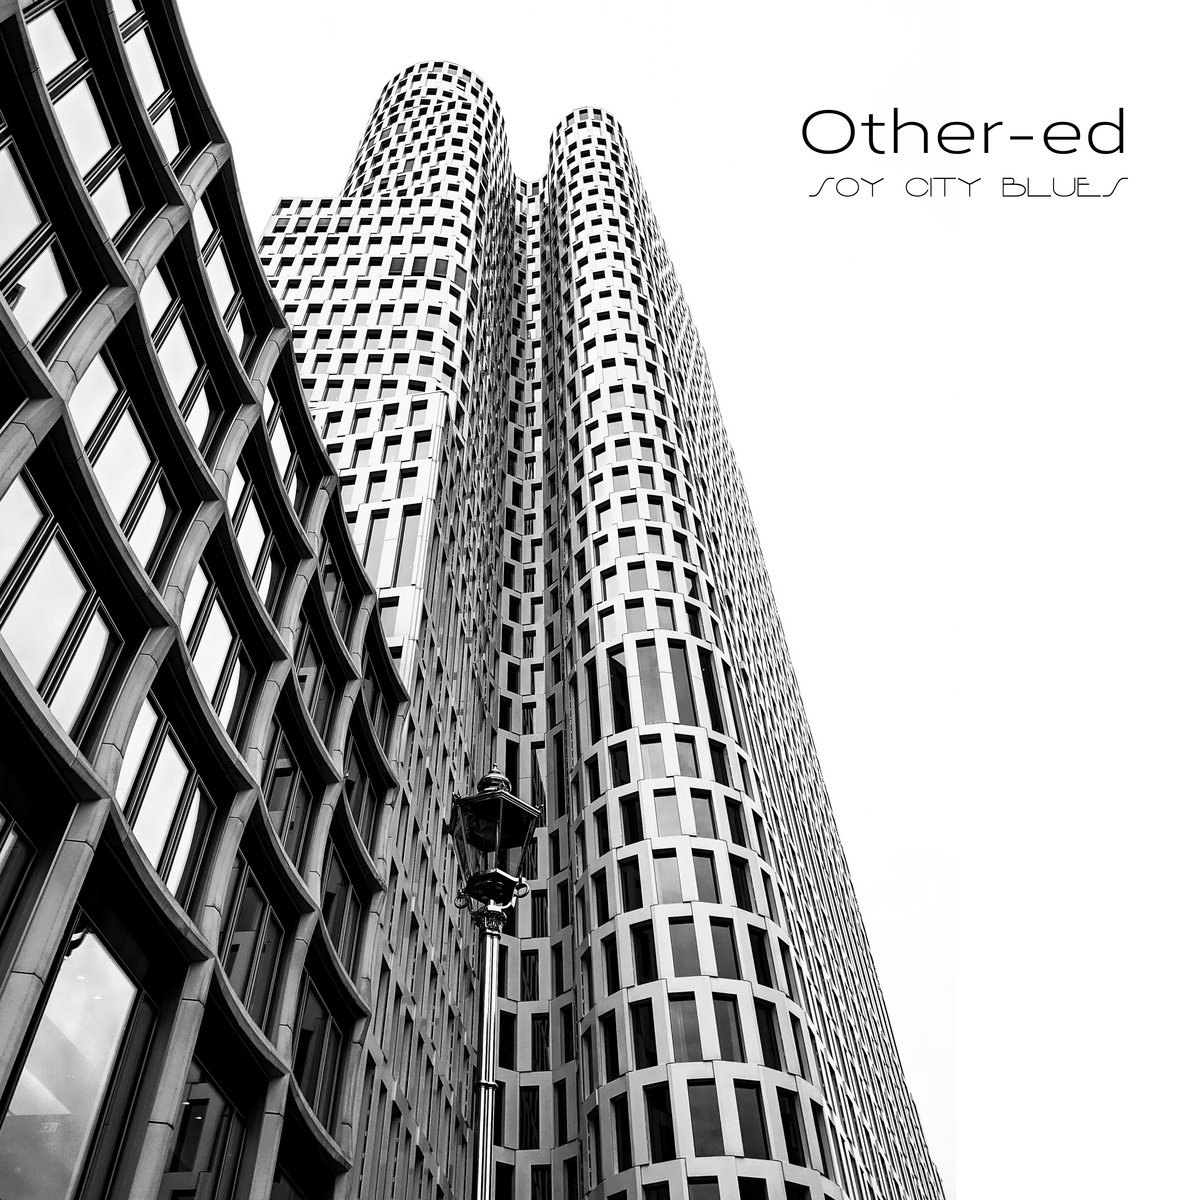 Electro News @ – Other-ed – Soy City Blues